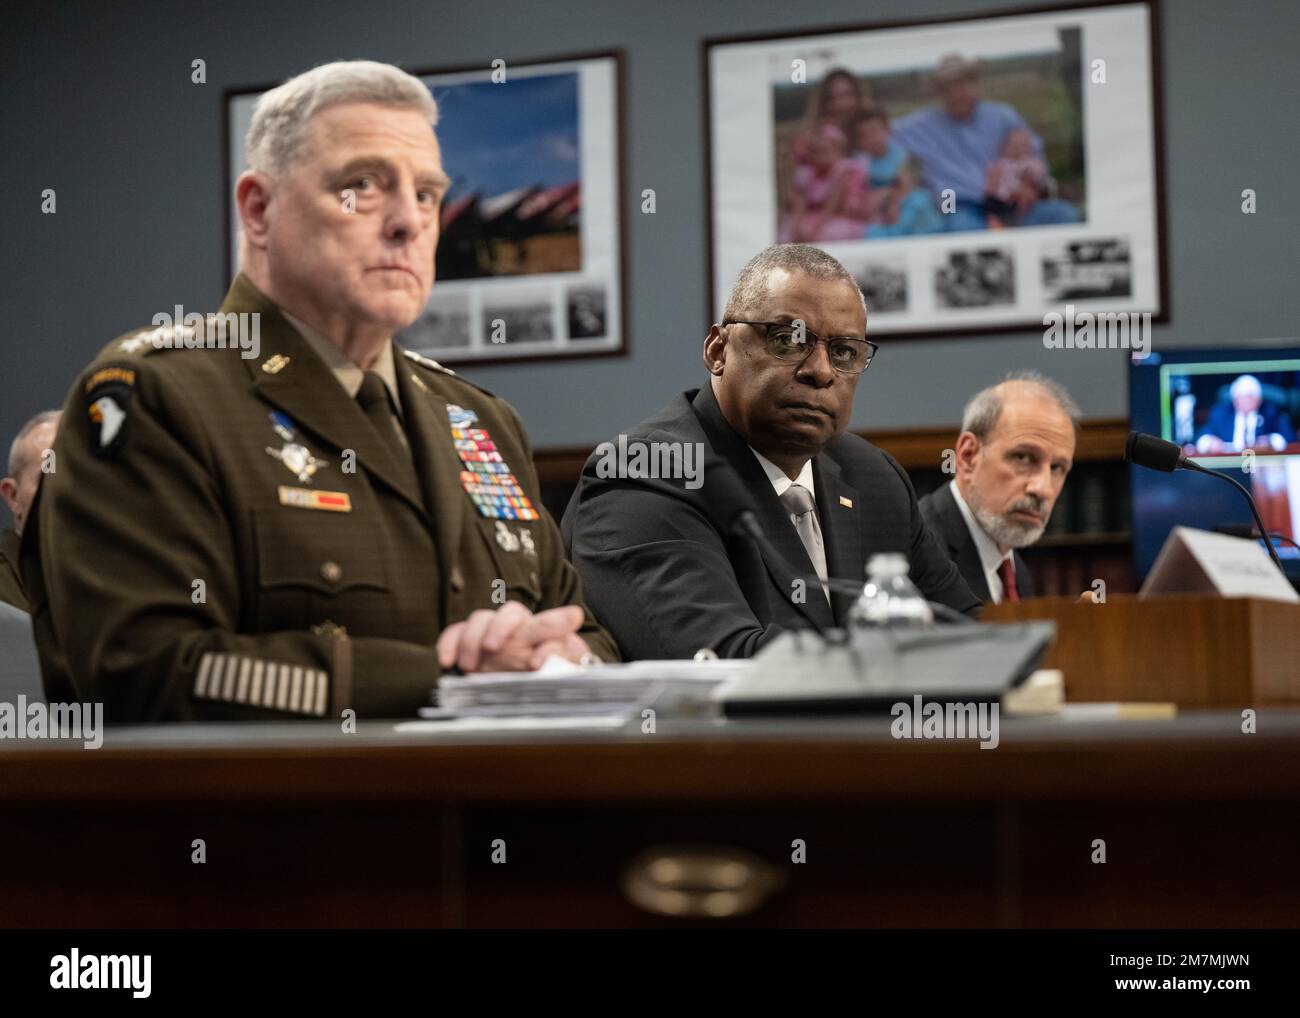 Secretary of Defense Lloyd J. Austin III, Army Gen. Mark A. Milley, chairman, Joint Chiefs of Staff, and Mike McCord, Under Secretary of Defense (comptroller)/Chief Financial Officer, provide testimony before the House Committee of Apropriations, Subcommittee on Defense (HAC-D) on the President's Fiscal Year 2023 budget request for the Department of Defense, 2118 Rayburn House Office Building, Washington, D.C. May 11, 2022. Stock Photo